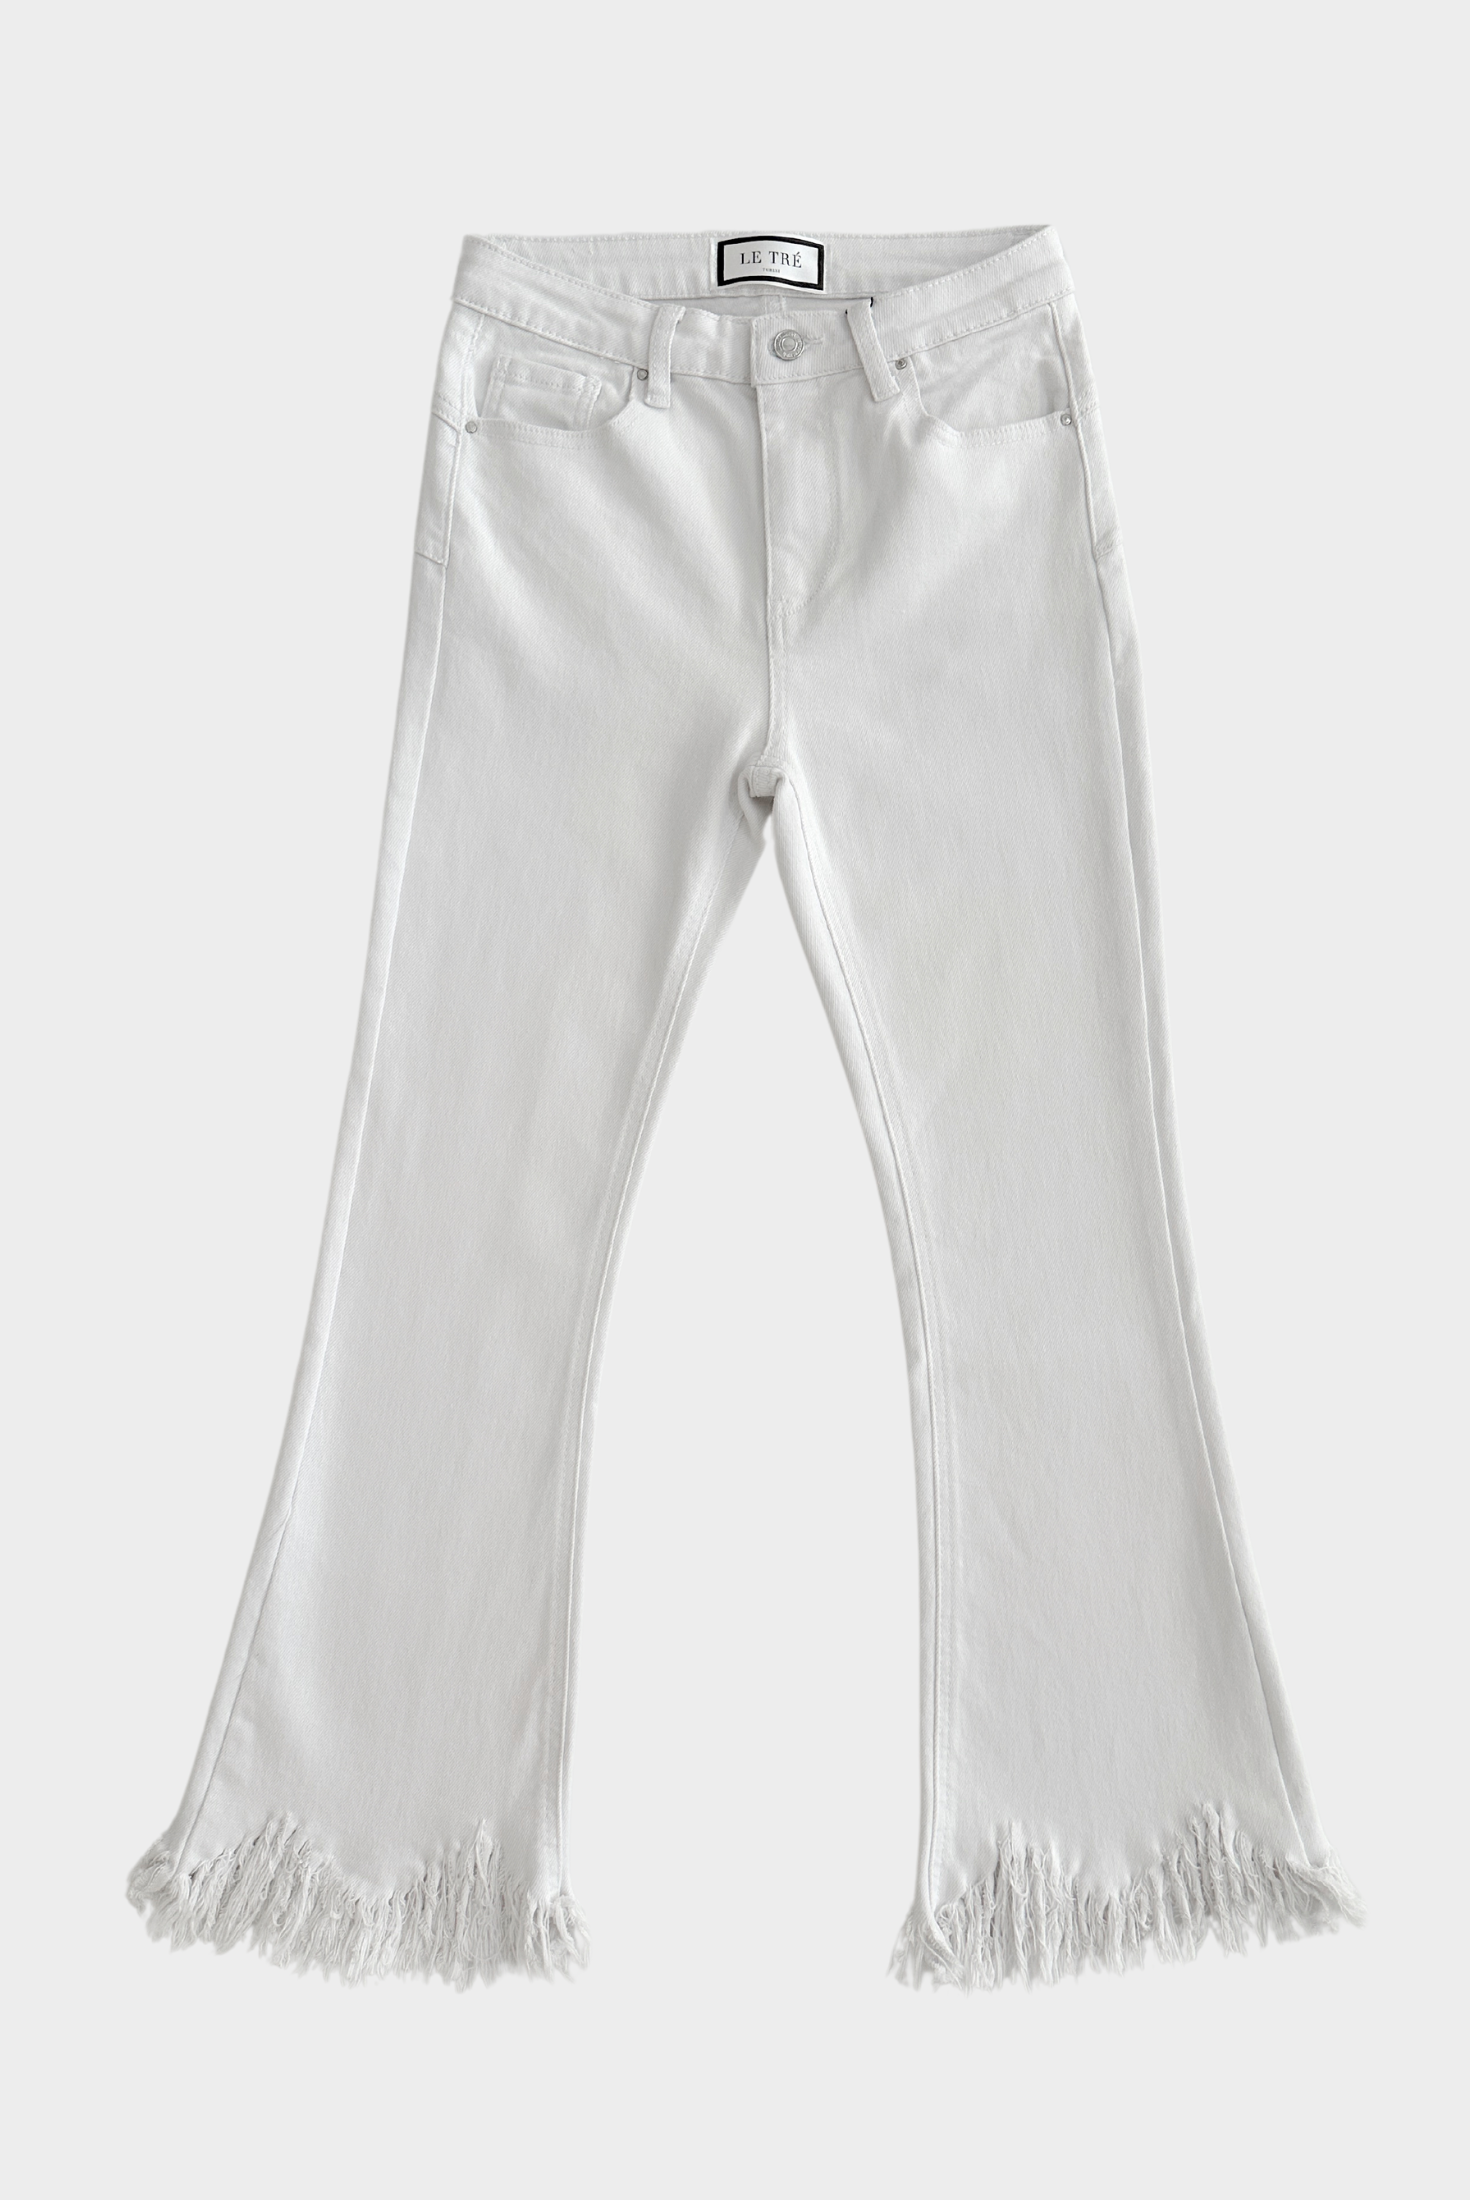 WHITE JEANS WITH FRAYED HEM